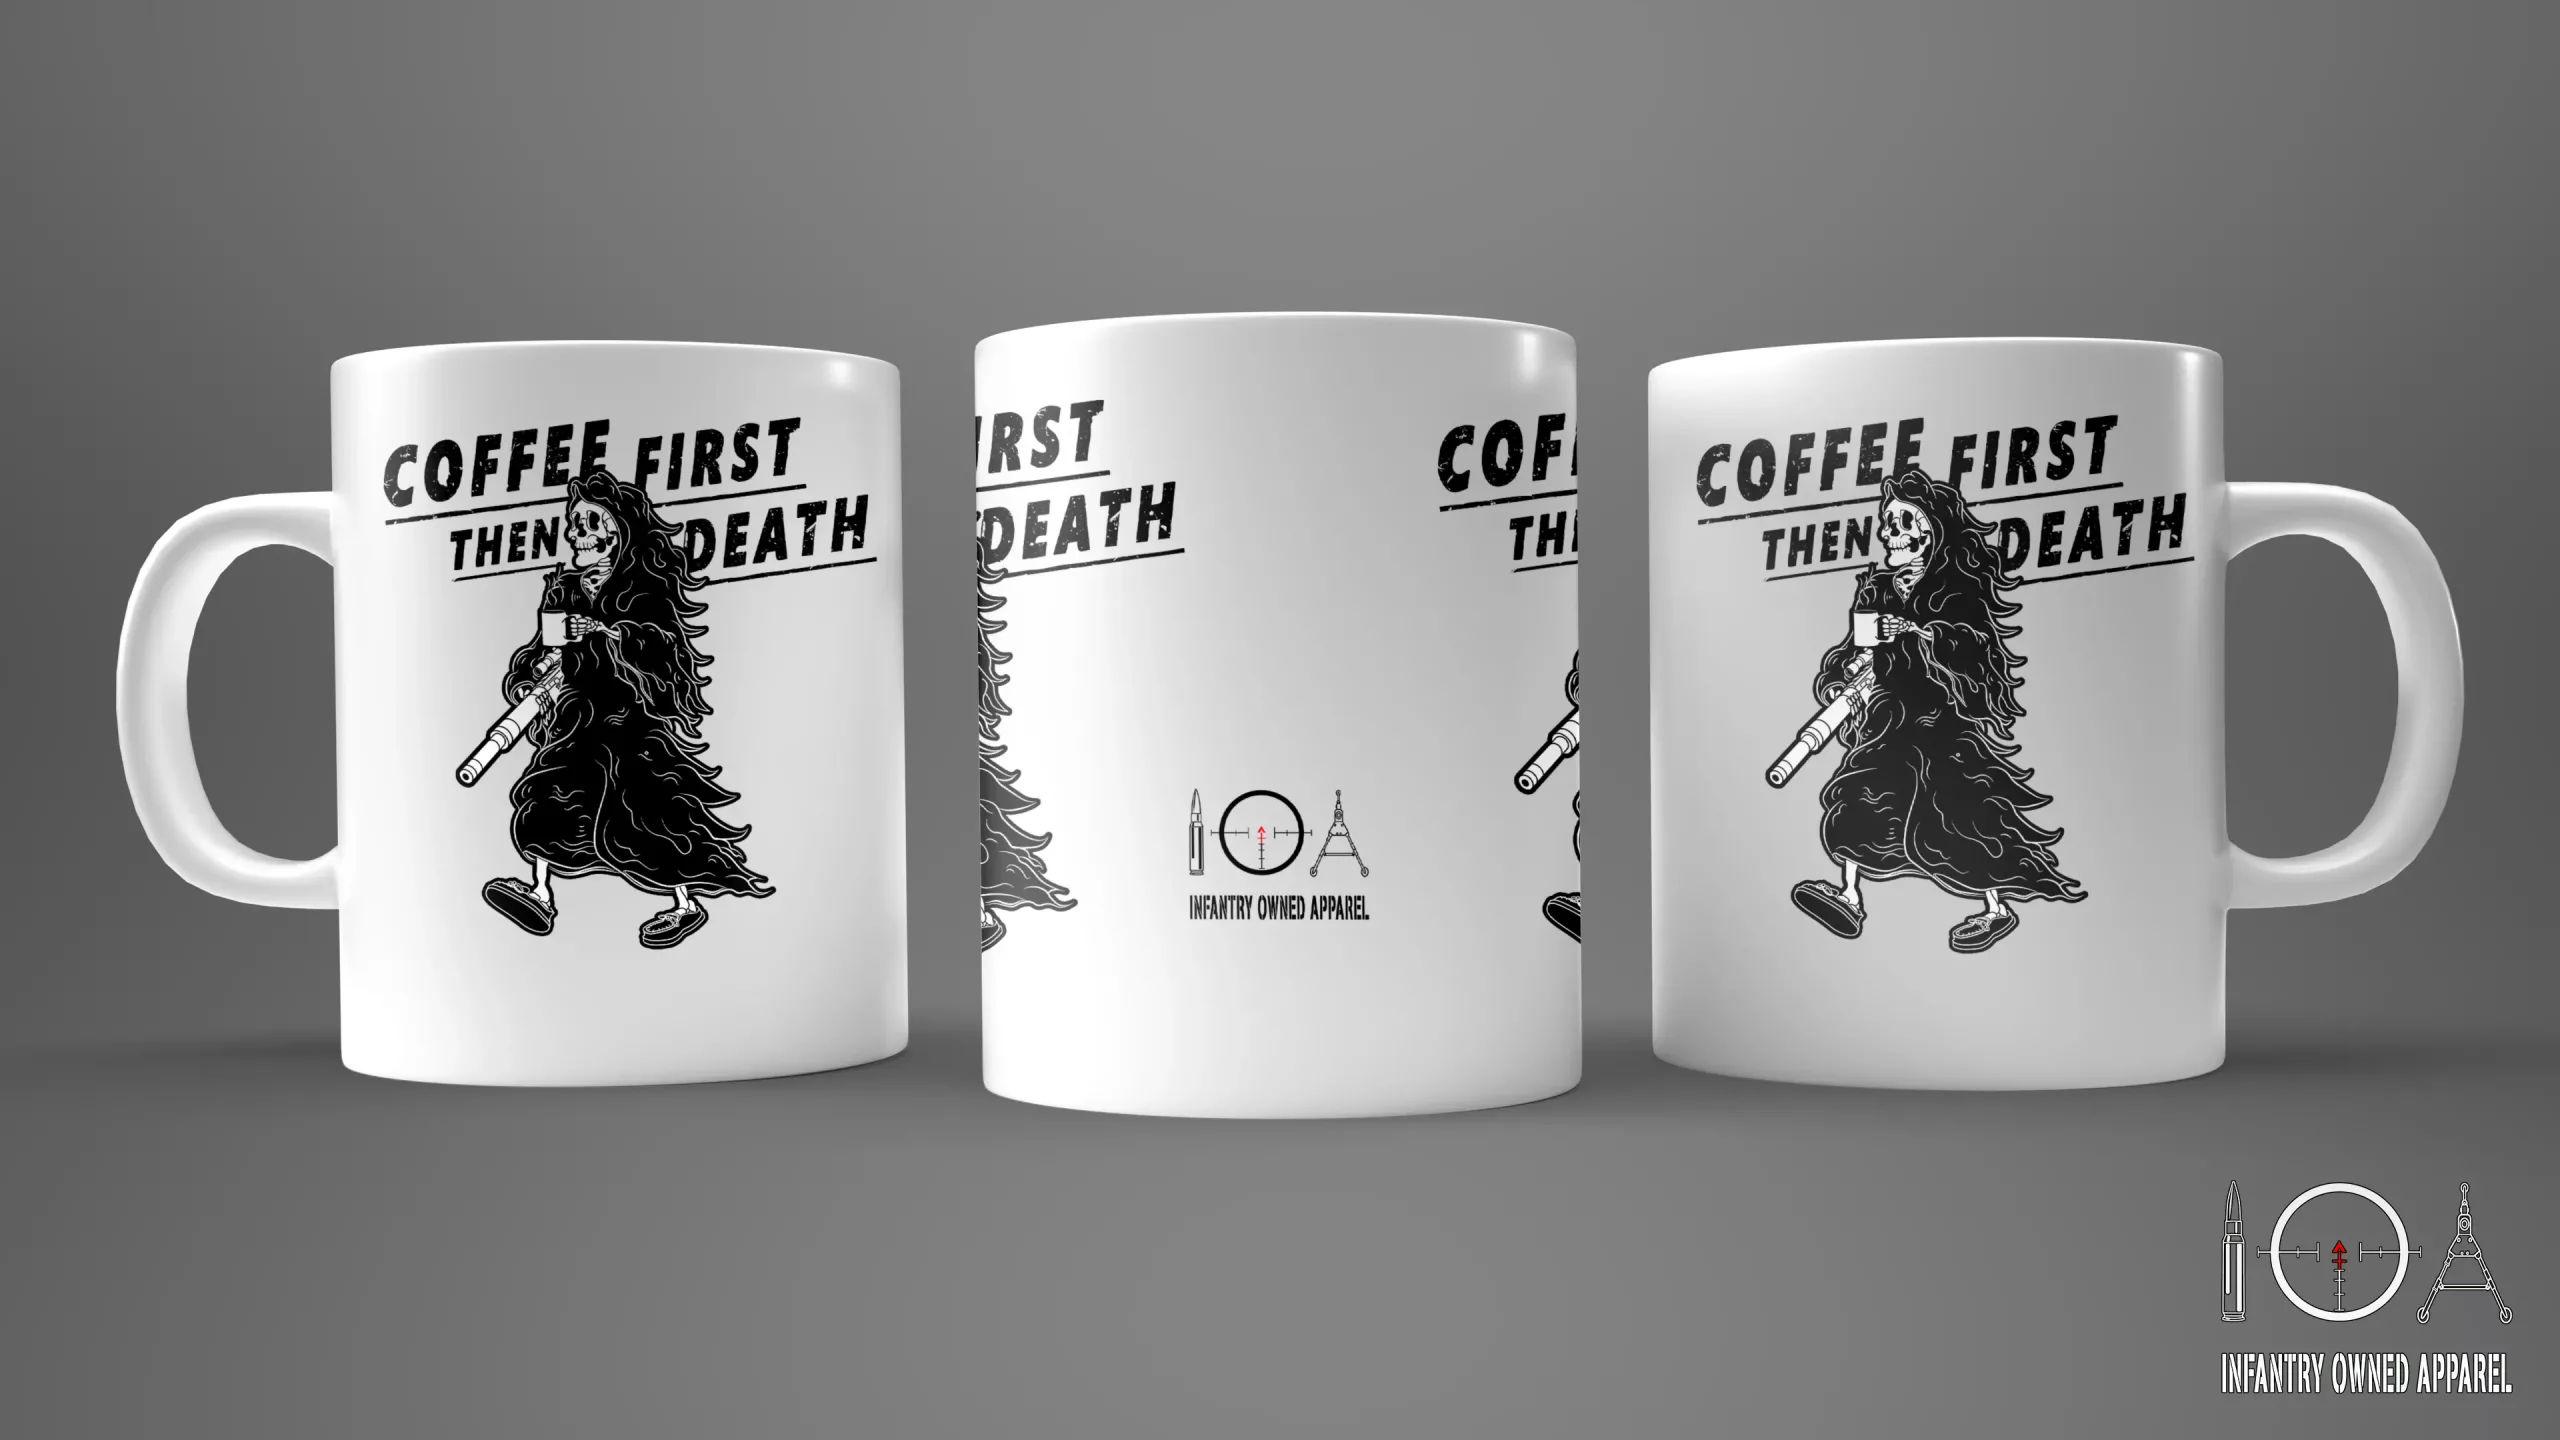 https://infantryowned.com/wp-content/uploads/2023/03/Black-rifle-coffee-co-coffee-first-white-mug-scaled.webp